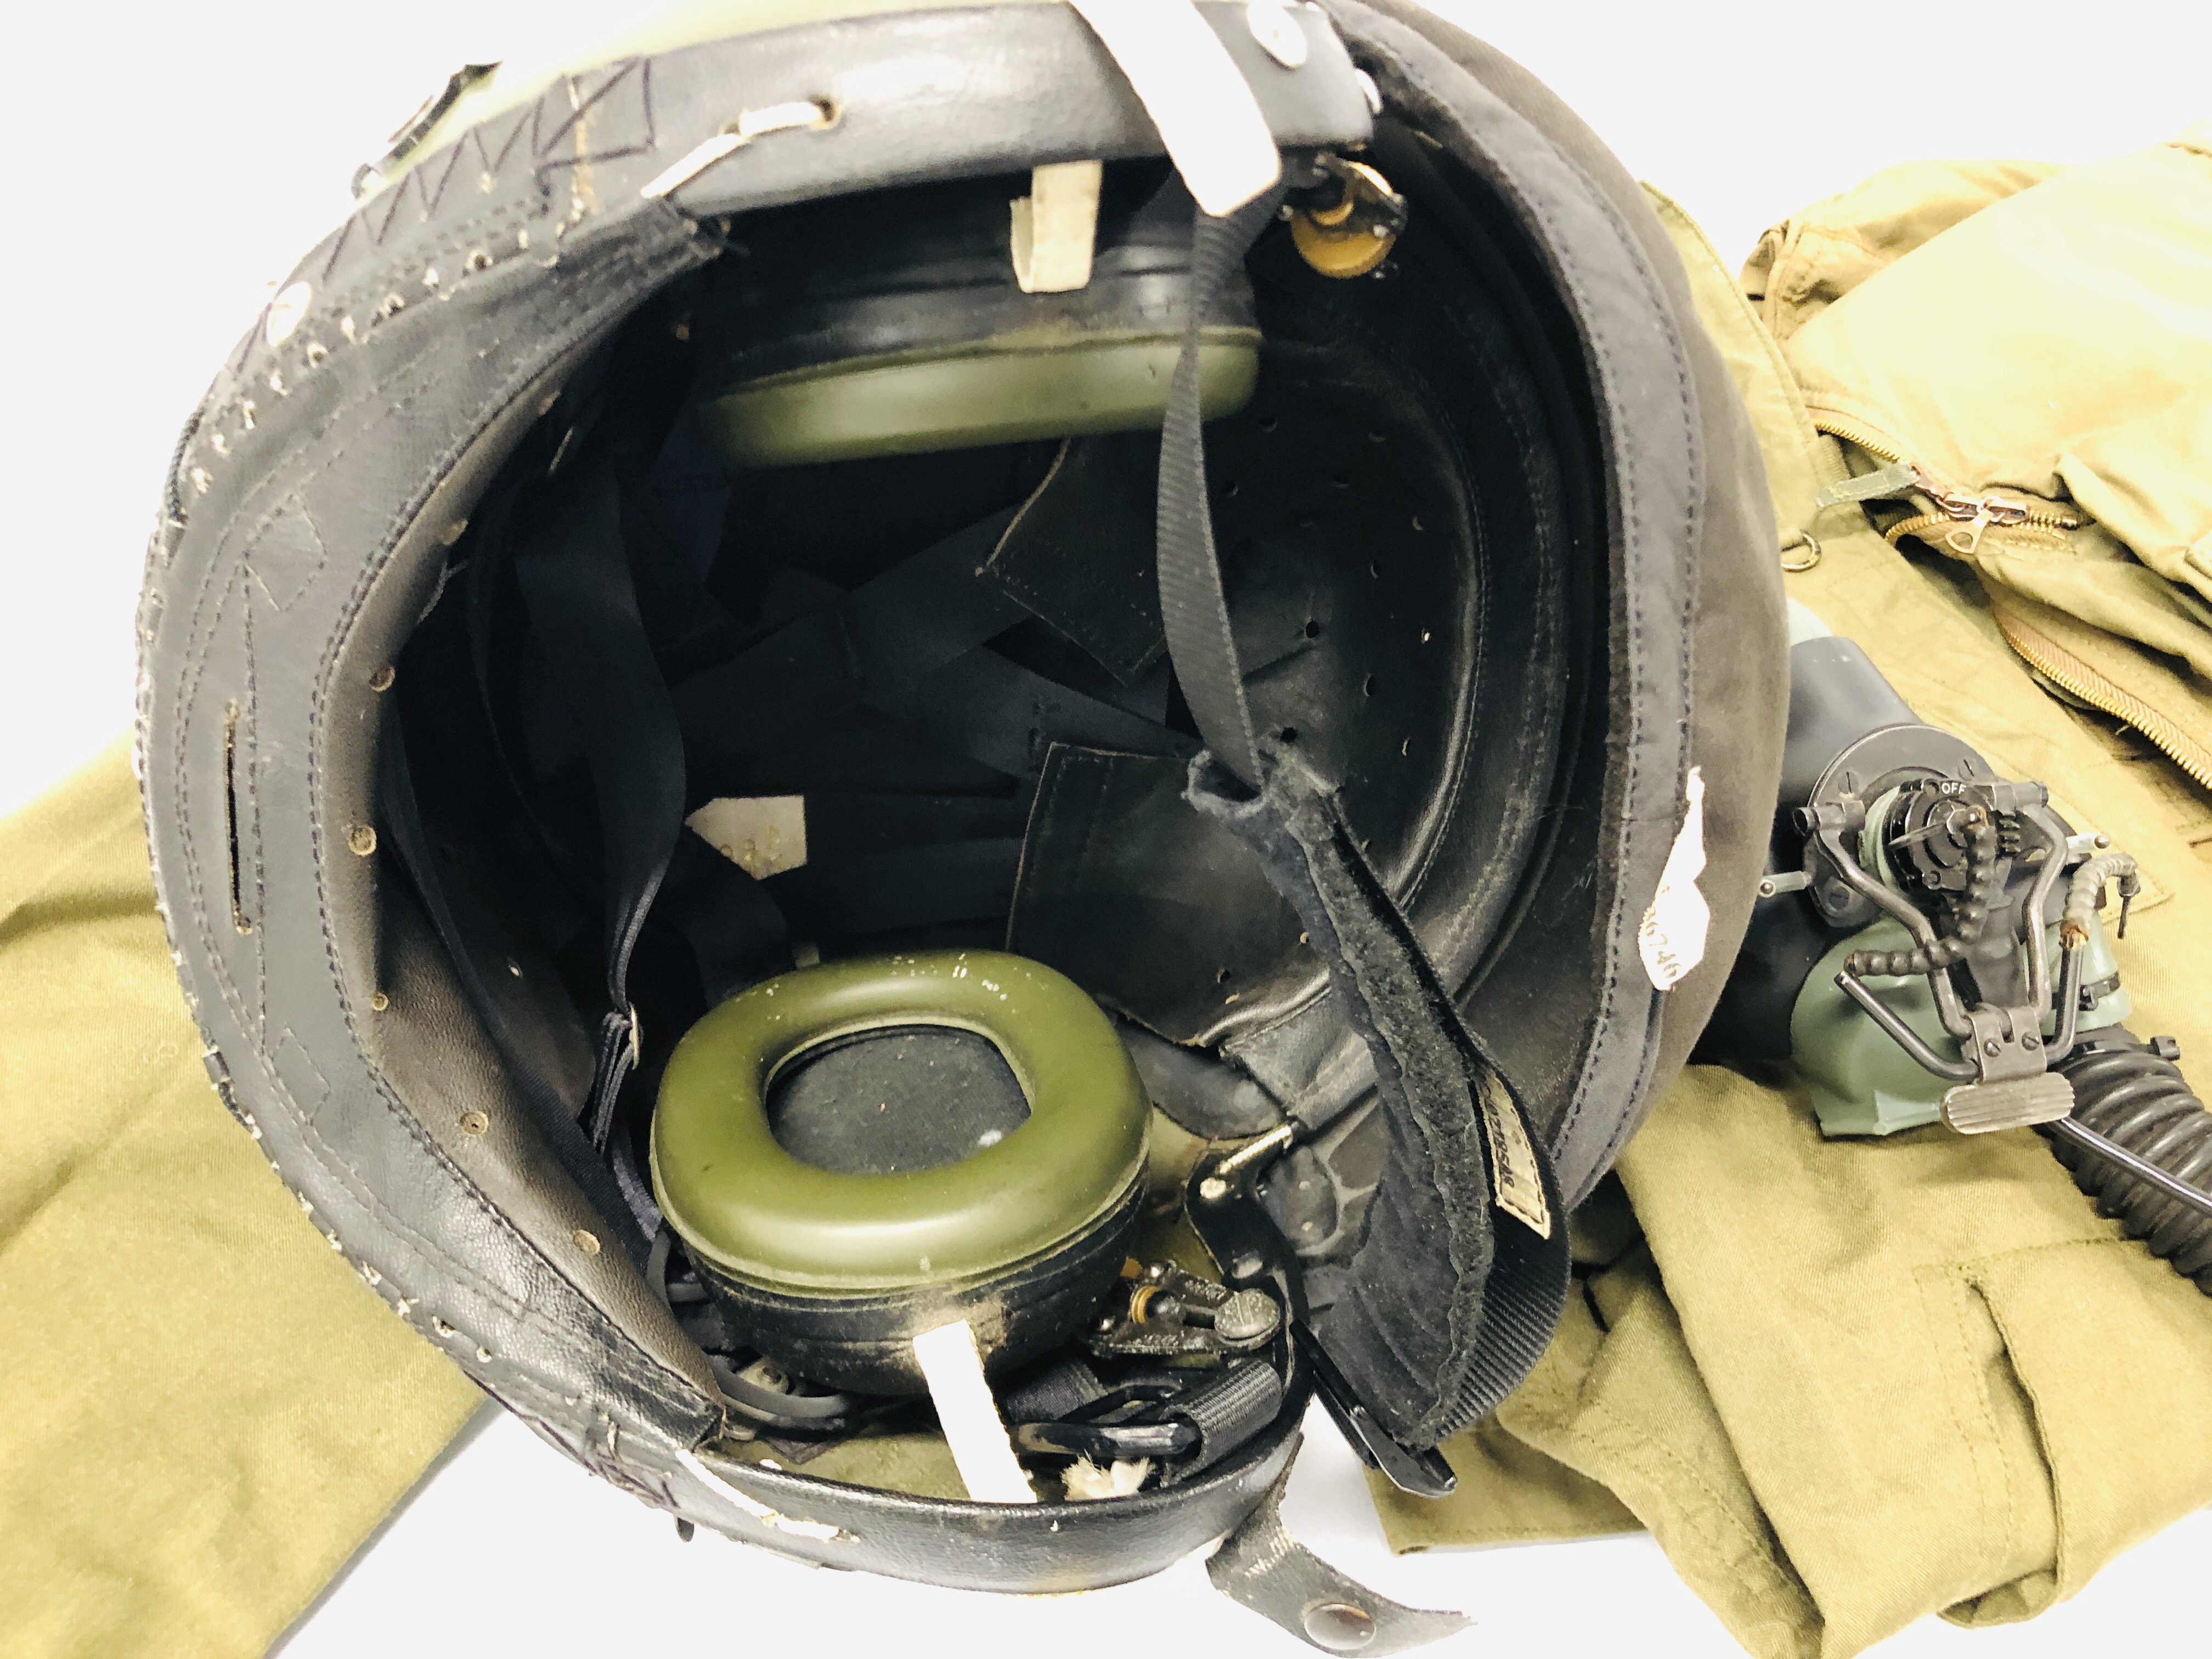 A FIGHTER PILOT'S HELMET ALONG WITH OXYGEN REGULATOR AND THREE SETS OF FLYING COVERALLS (FOR - Image 8 of 20